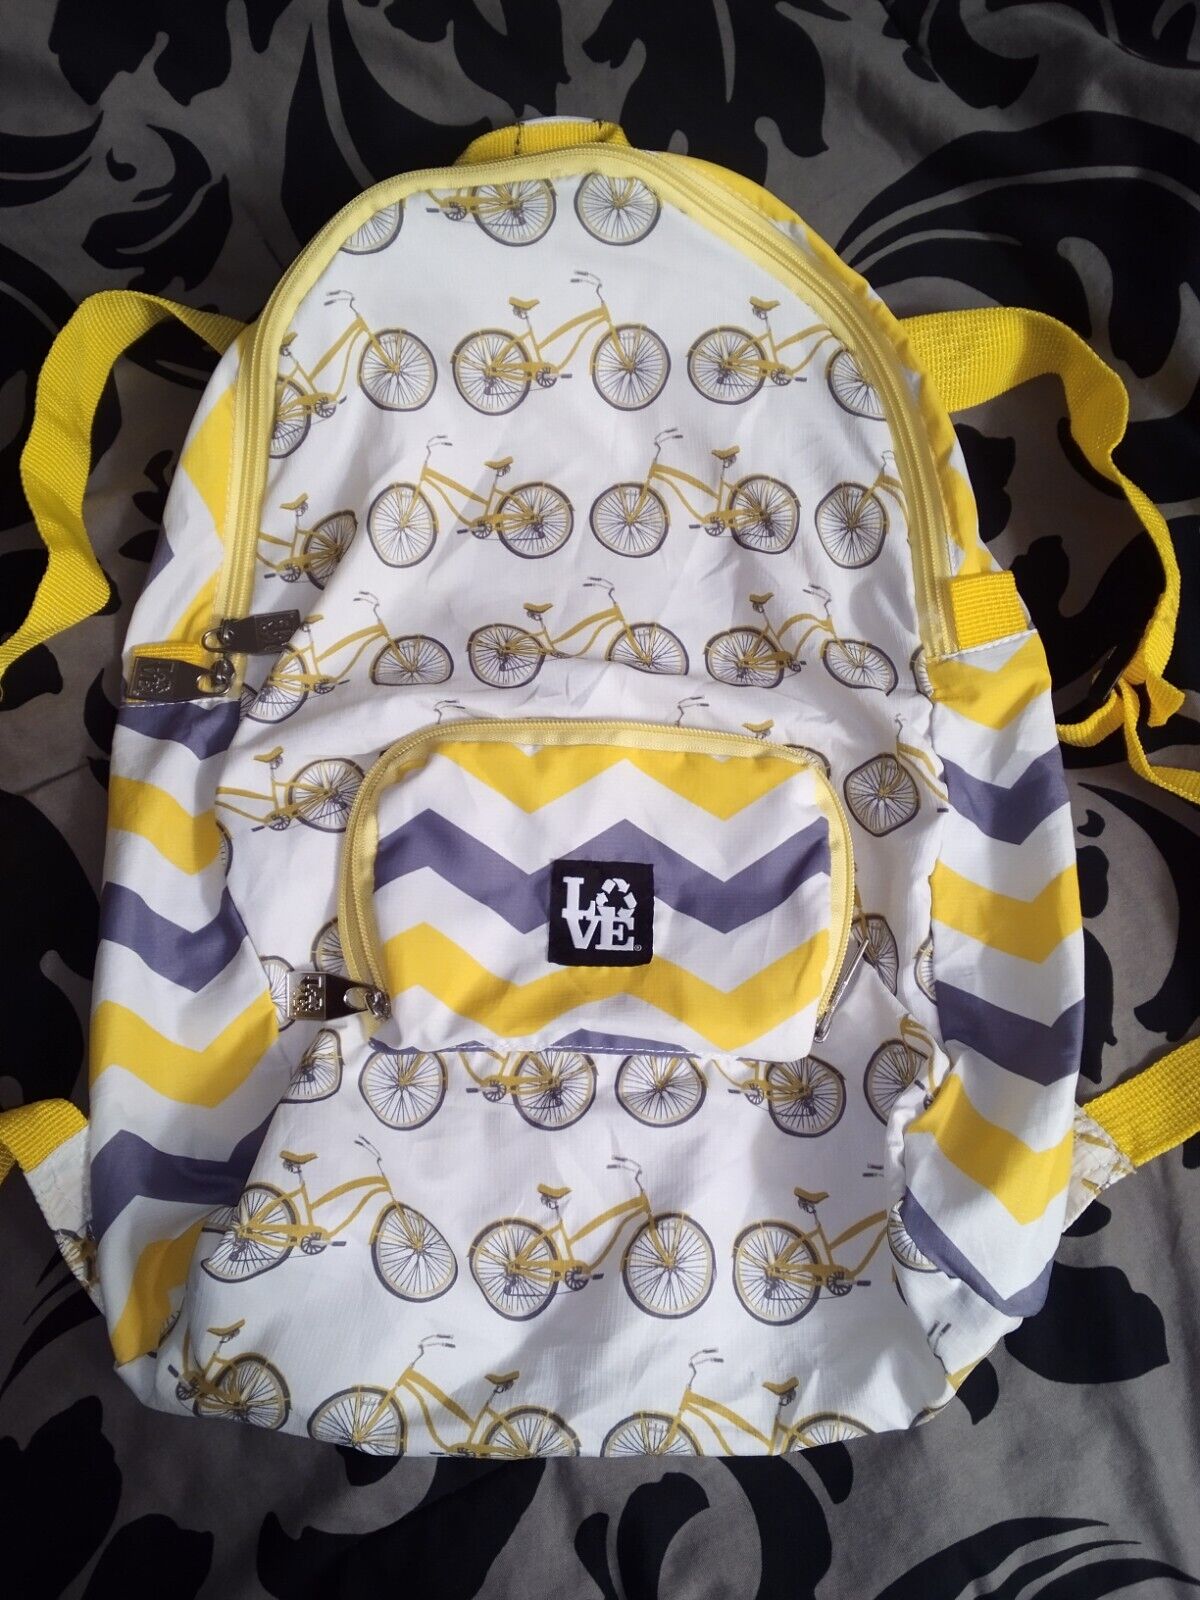 LOVE Stash It backpack in limited edition "Pedal Power" print, yellow